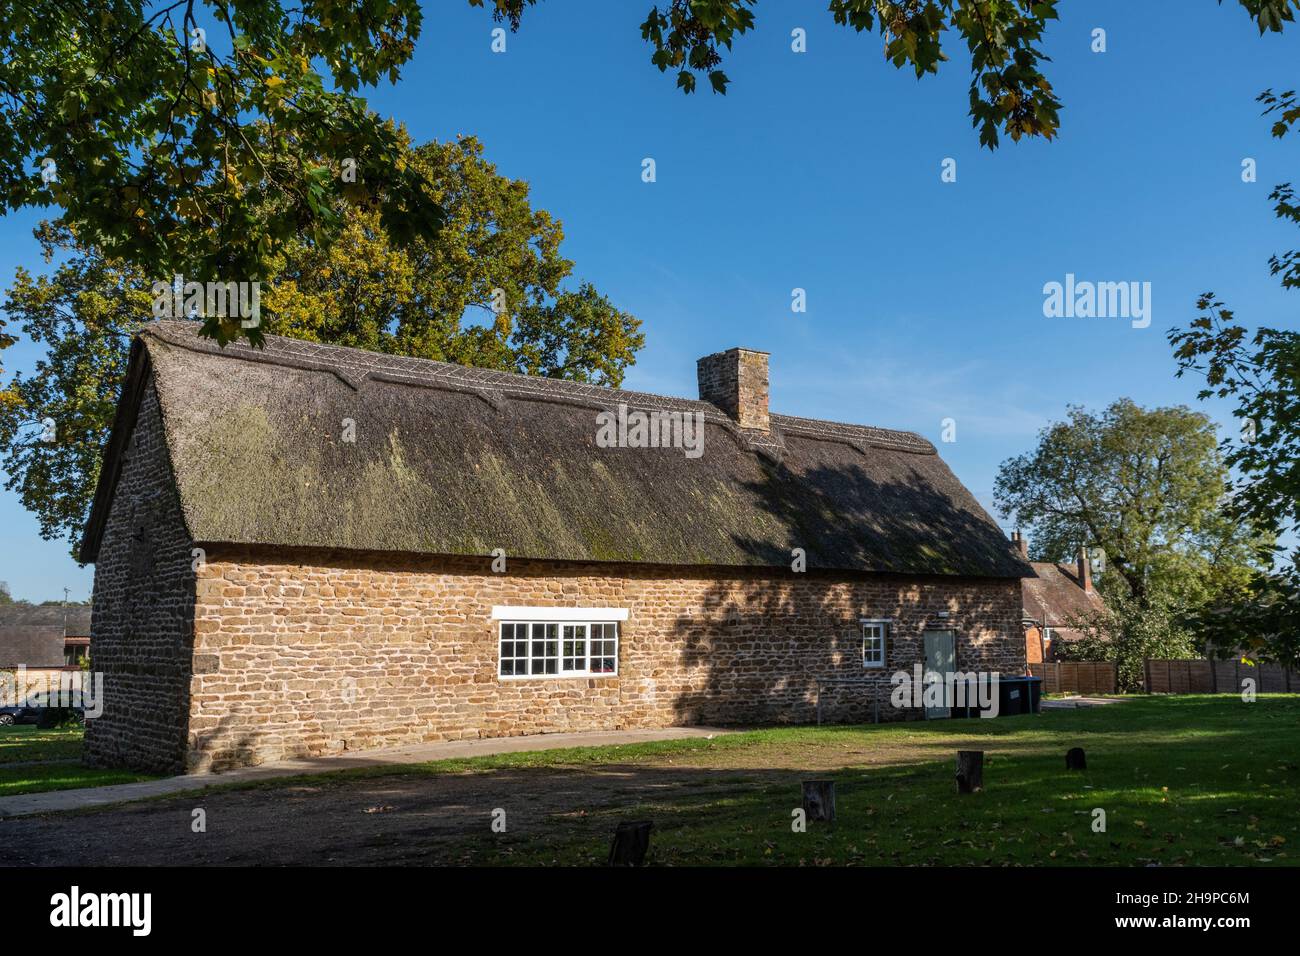 The Village Hall, a stone built thatched building, Ashby St Ledgers, Northamptonshire, UK Stock Photo